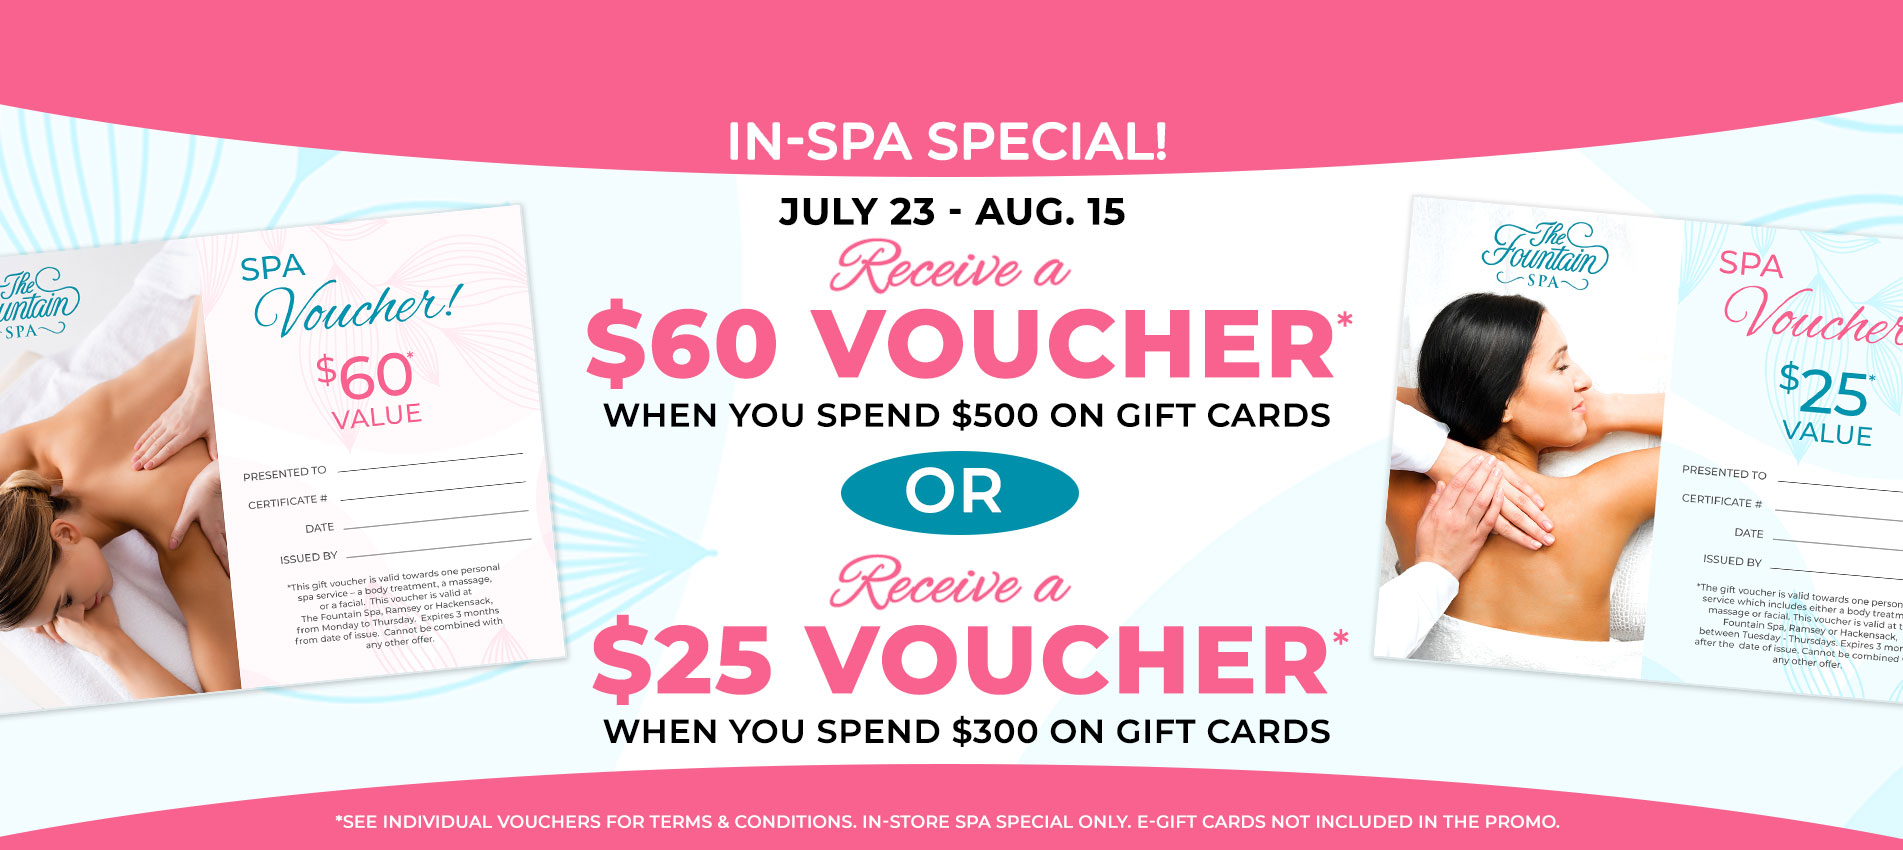 Receive a $60 Voucher when you spend $500 on Gift cards In-Spa or Receive a $25 Voucher when you spend $300 on Gift cards In-Spa